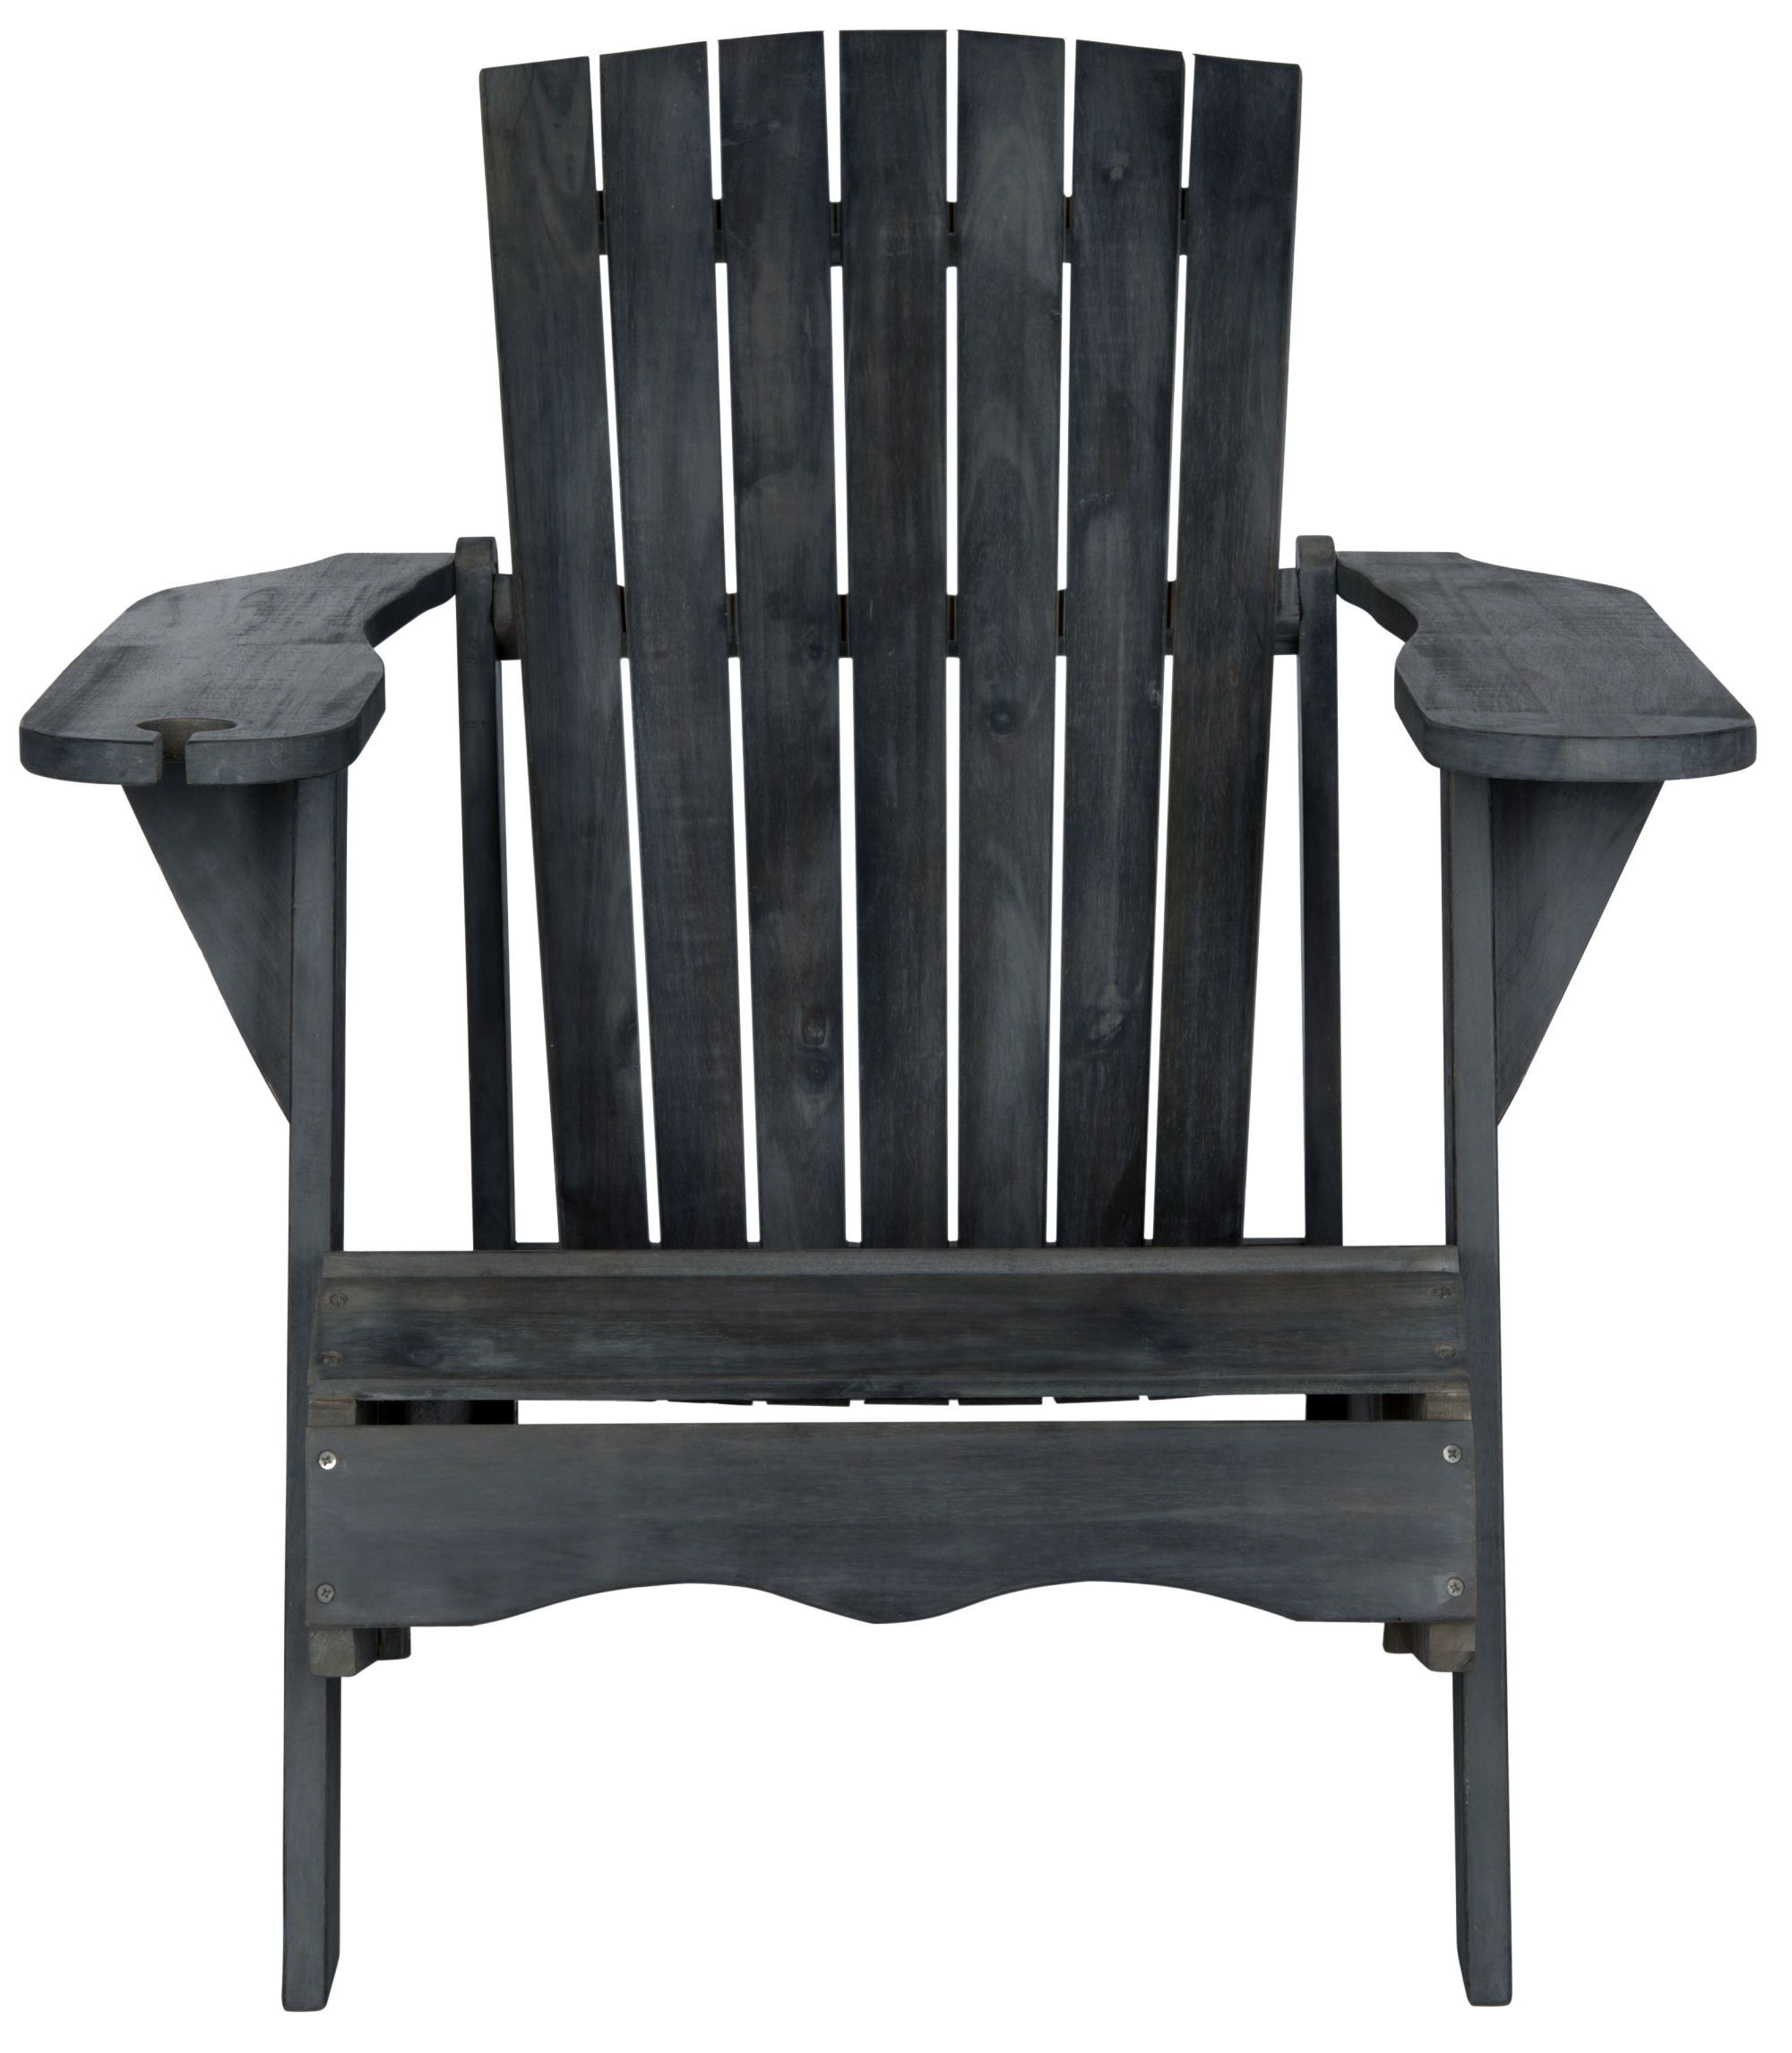 Vista Wine Glass Holder Adirondack Chair Inside Outdoor Chair With Wine Holder (View 10 of 15)